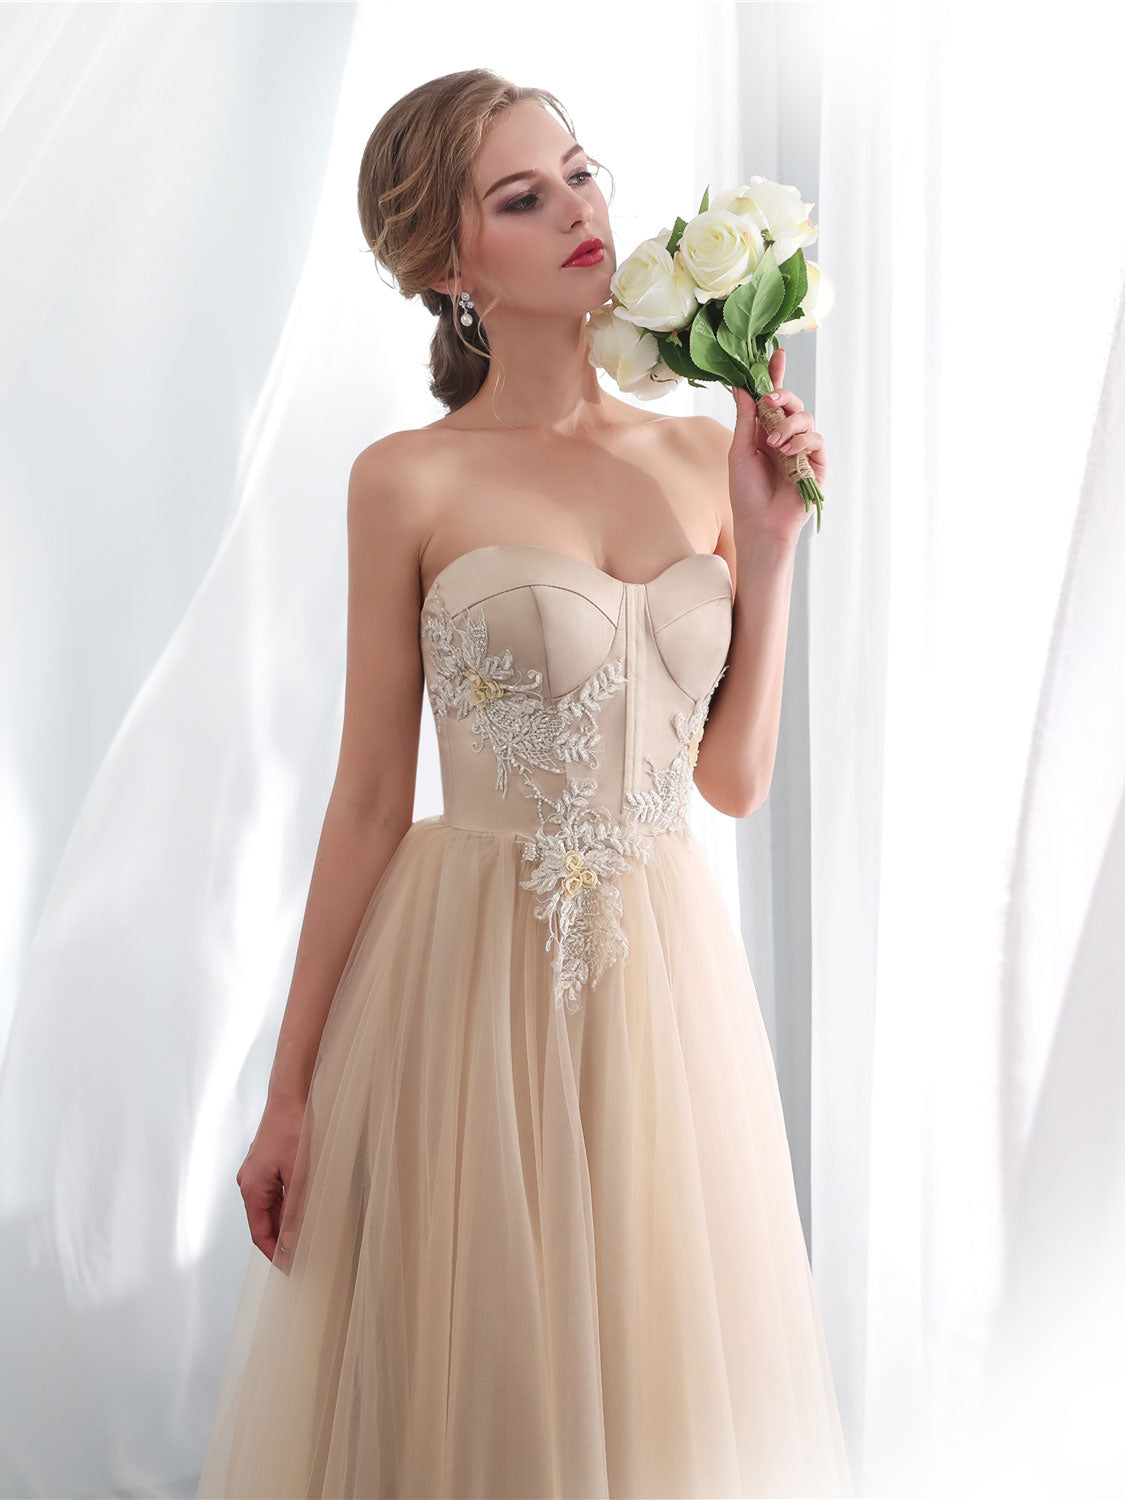 A line sweetheart neck tulle long prom dress champagne tulle formal dress